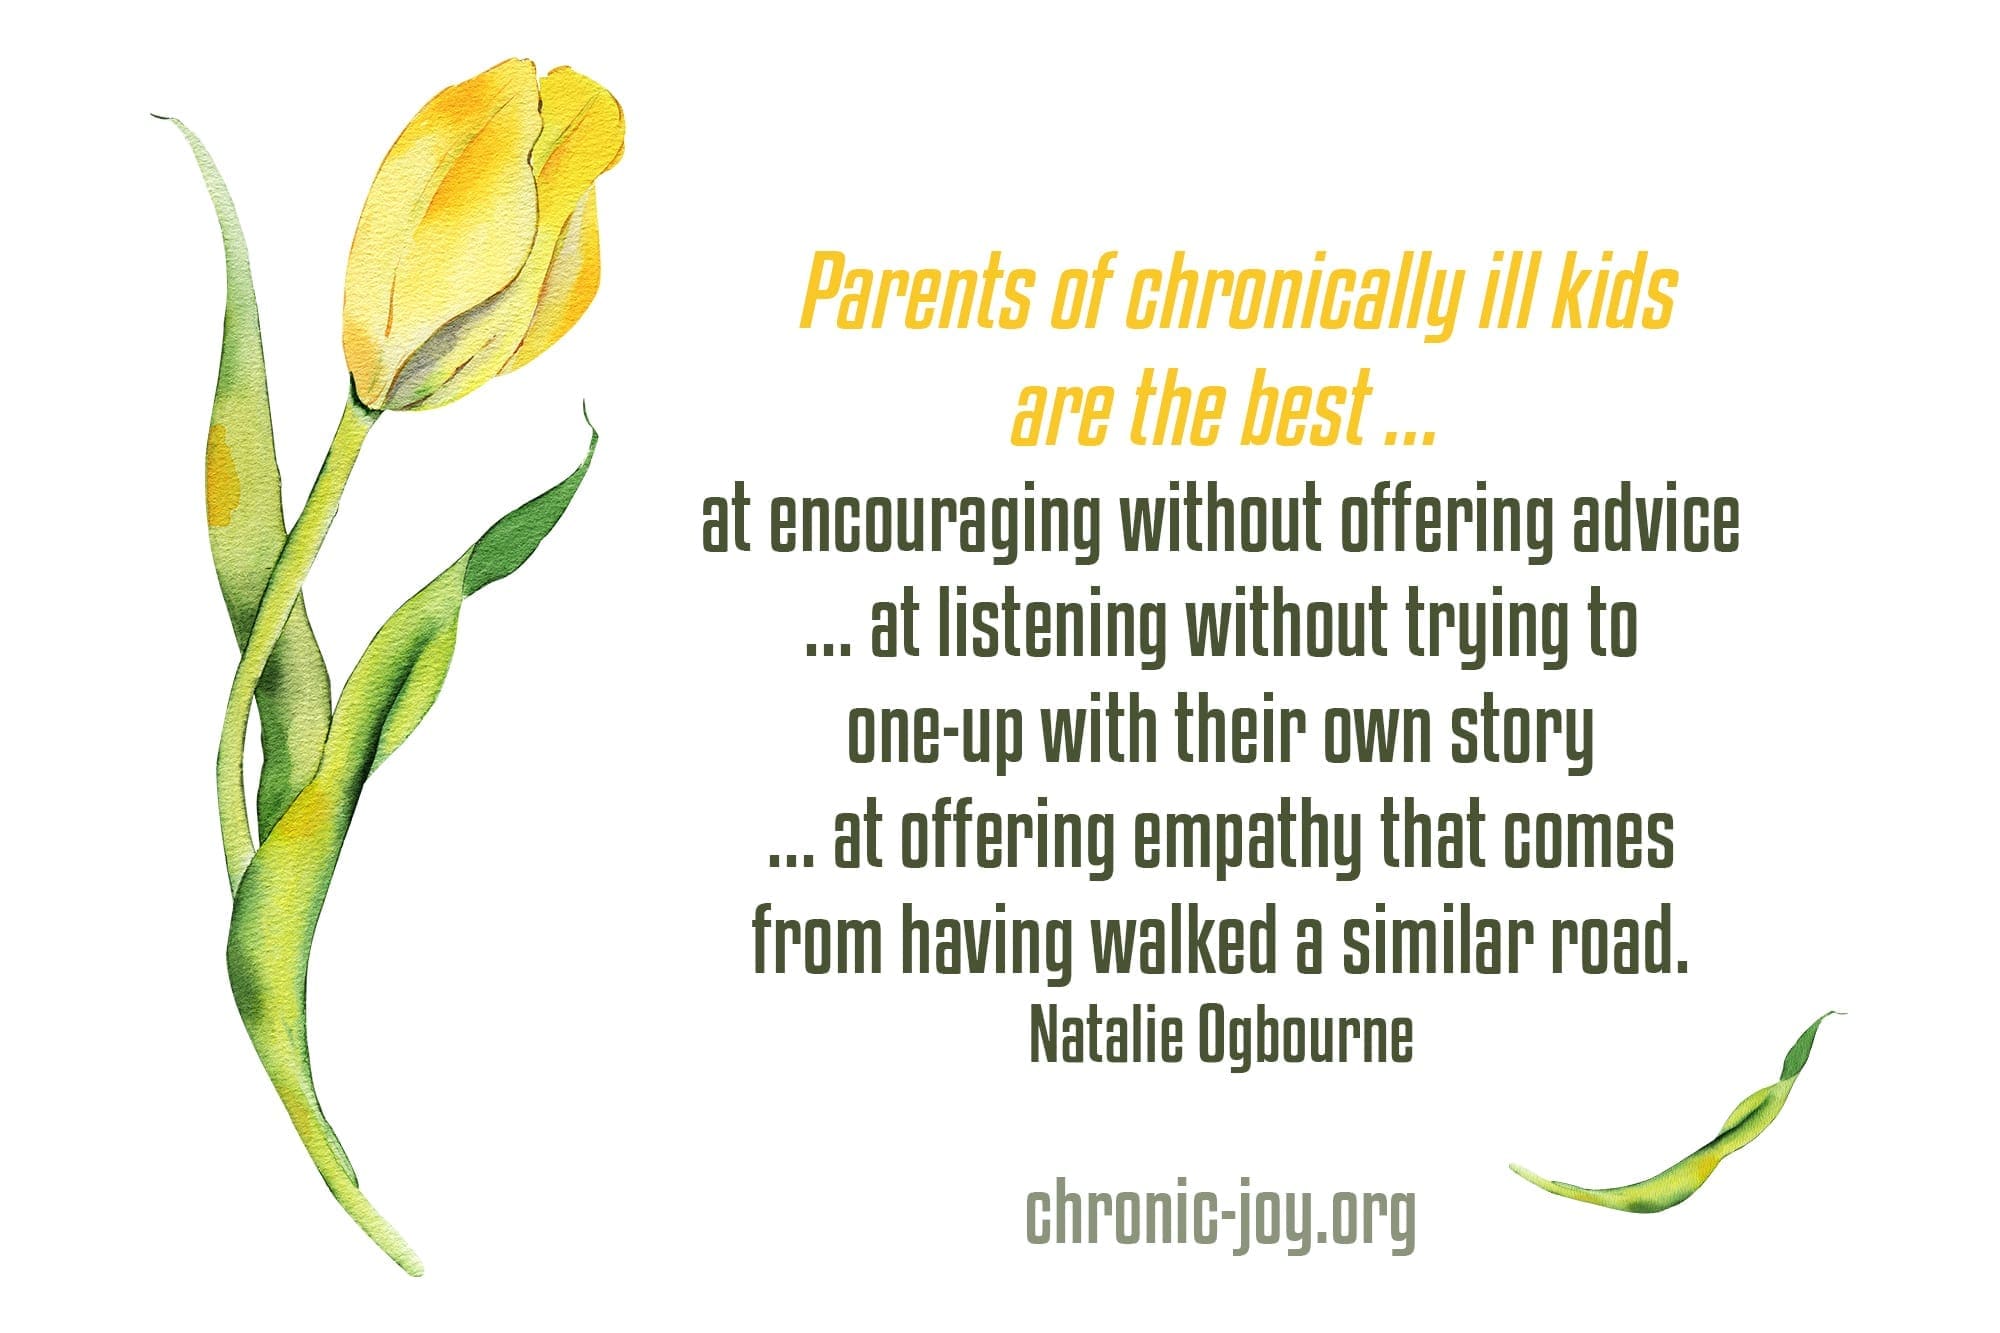 "Parents of chronically ill kids are the best ... at encouraging without offering advice ... at listening without trying to one-up with their own story ... at offering empathy that comes from having walked a similar road." Natalie Ogbourne